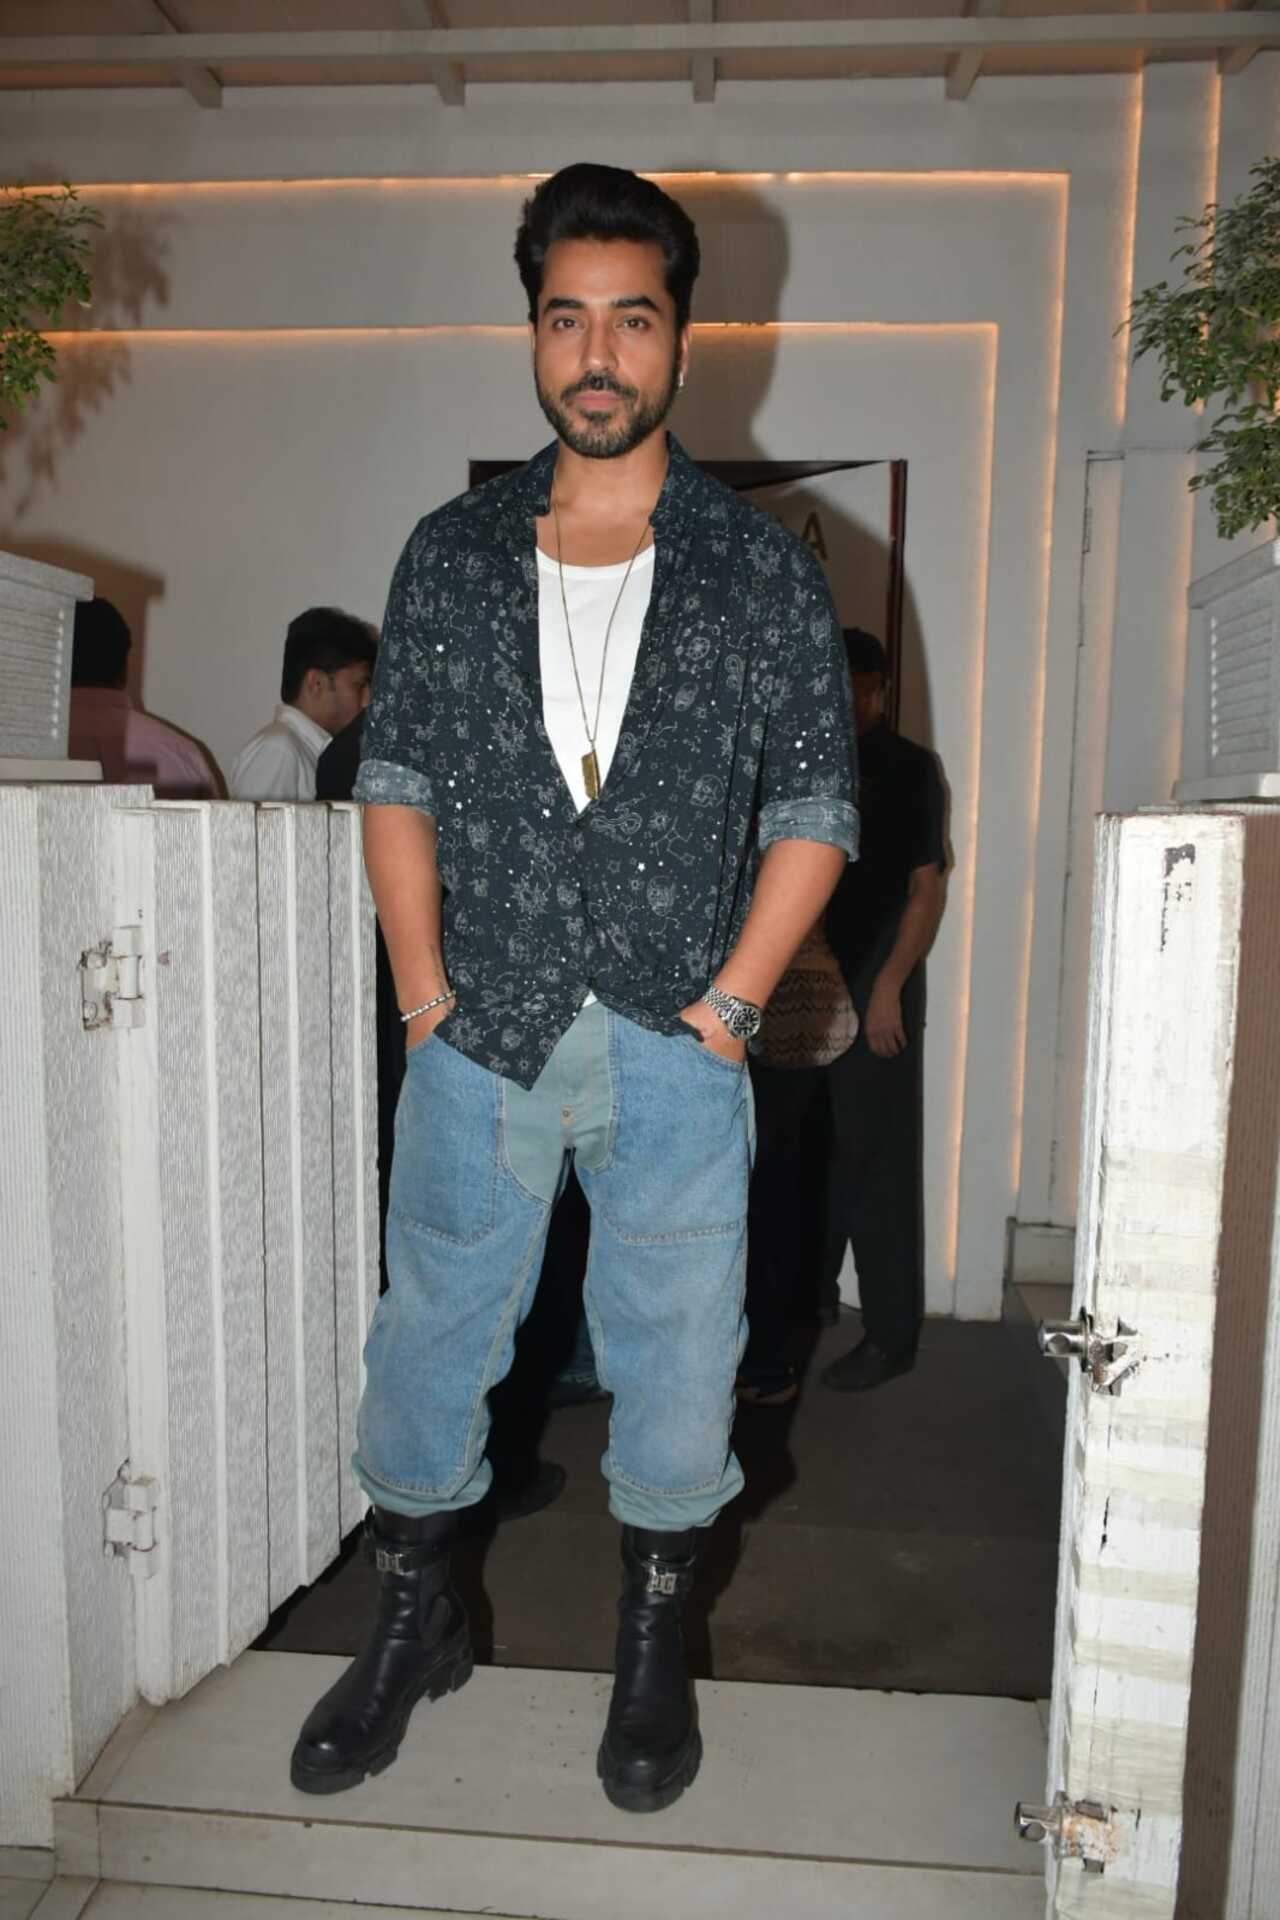 Gautam Gulati was at Akansha's birthday party. He wore a white T-shirt, jeans and a jacket